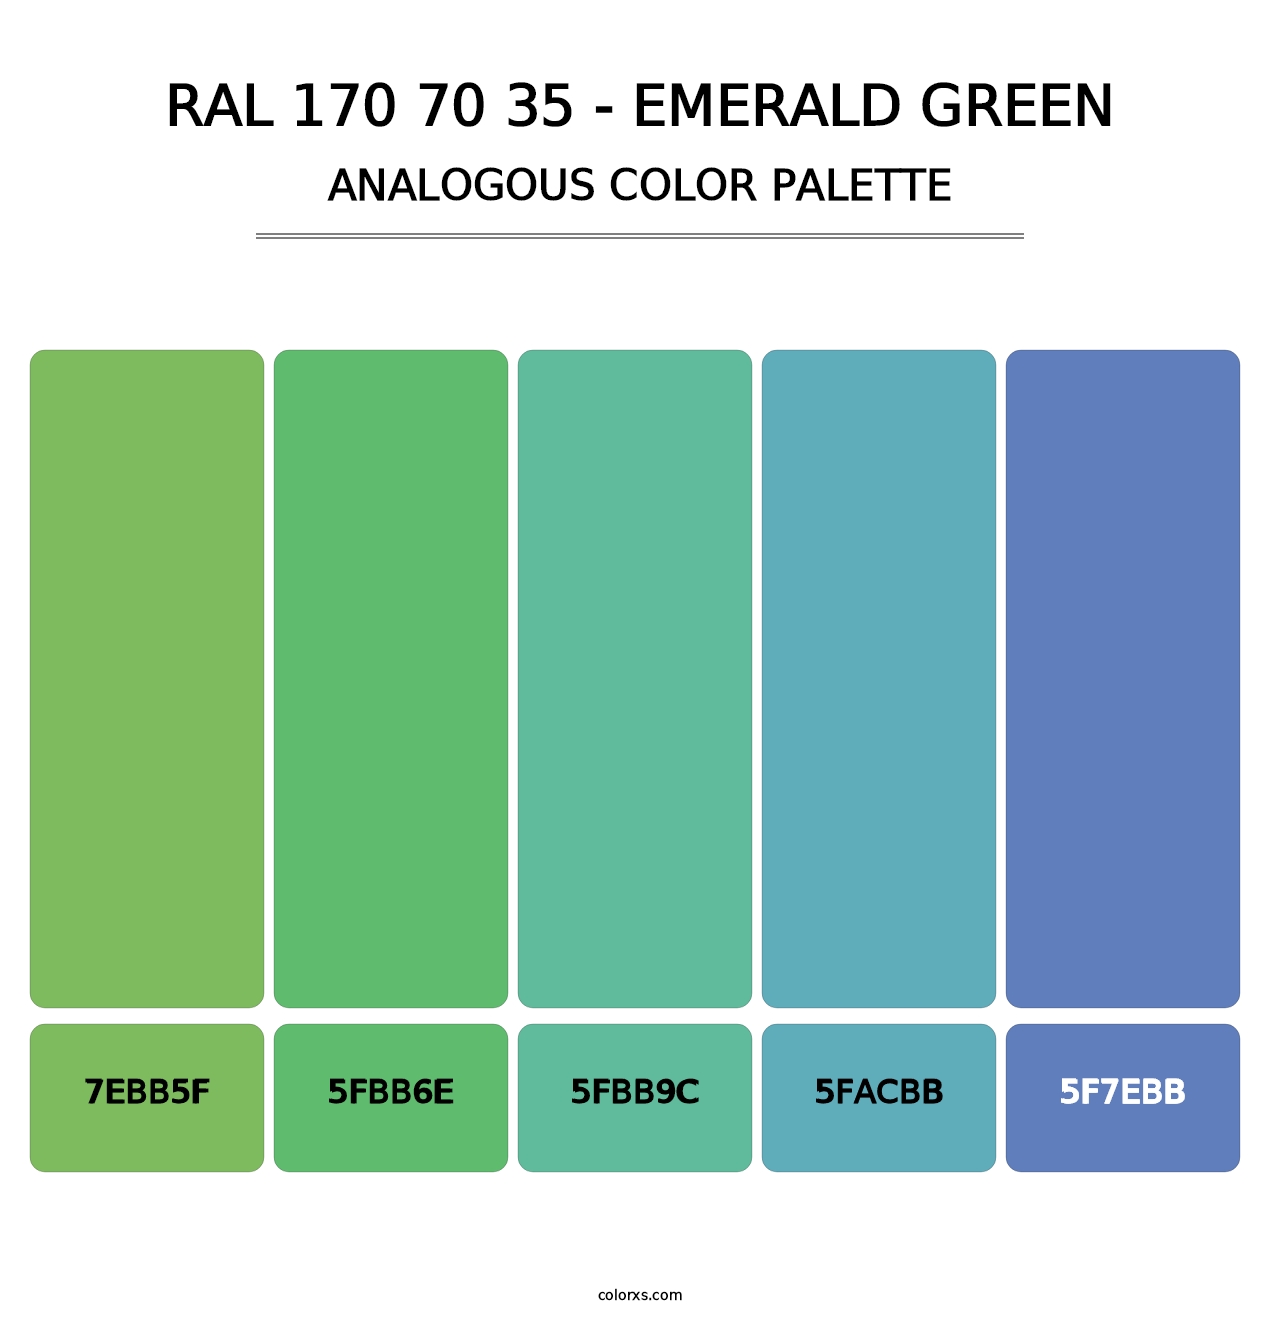 RAL 170 70 35 - Emerald Green - Analogous Color Palette